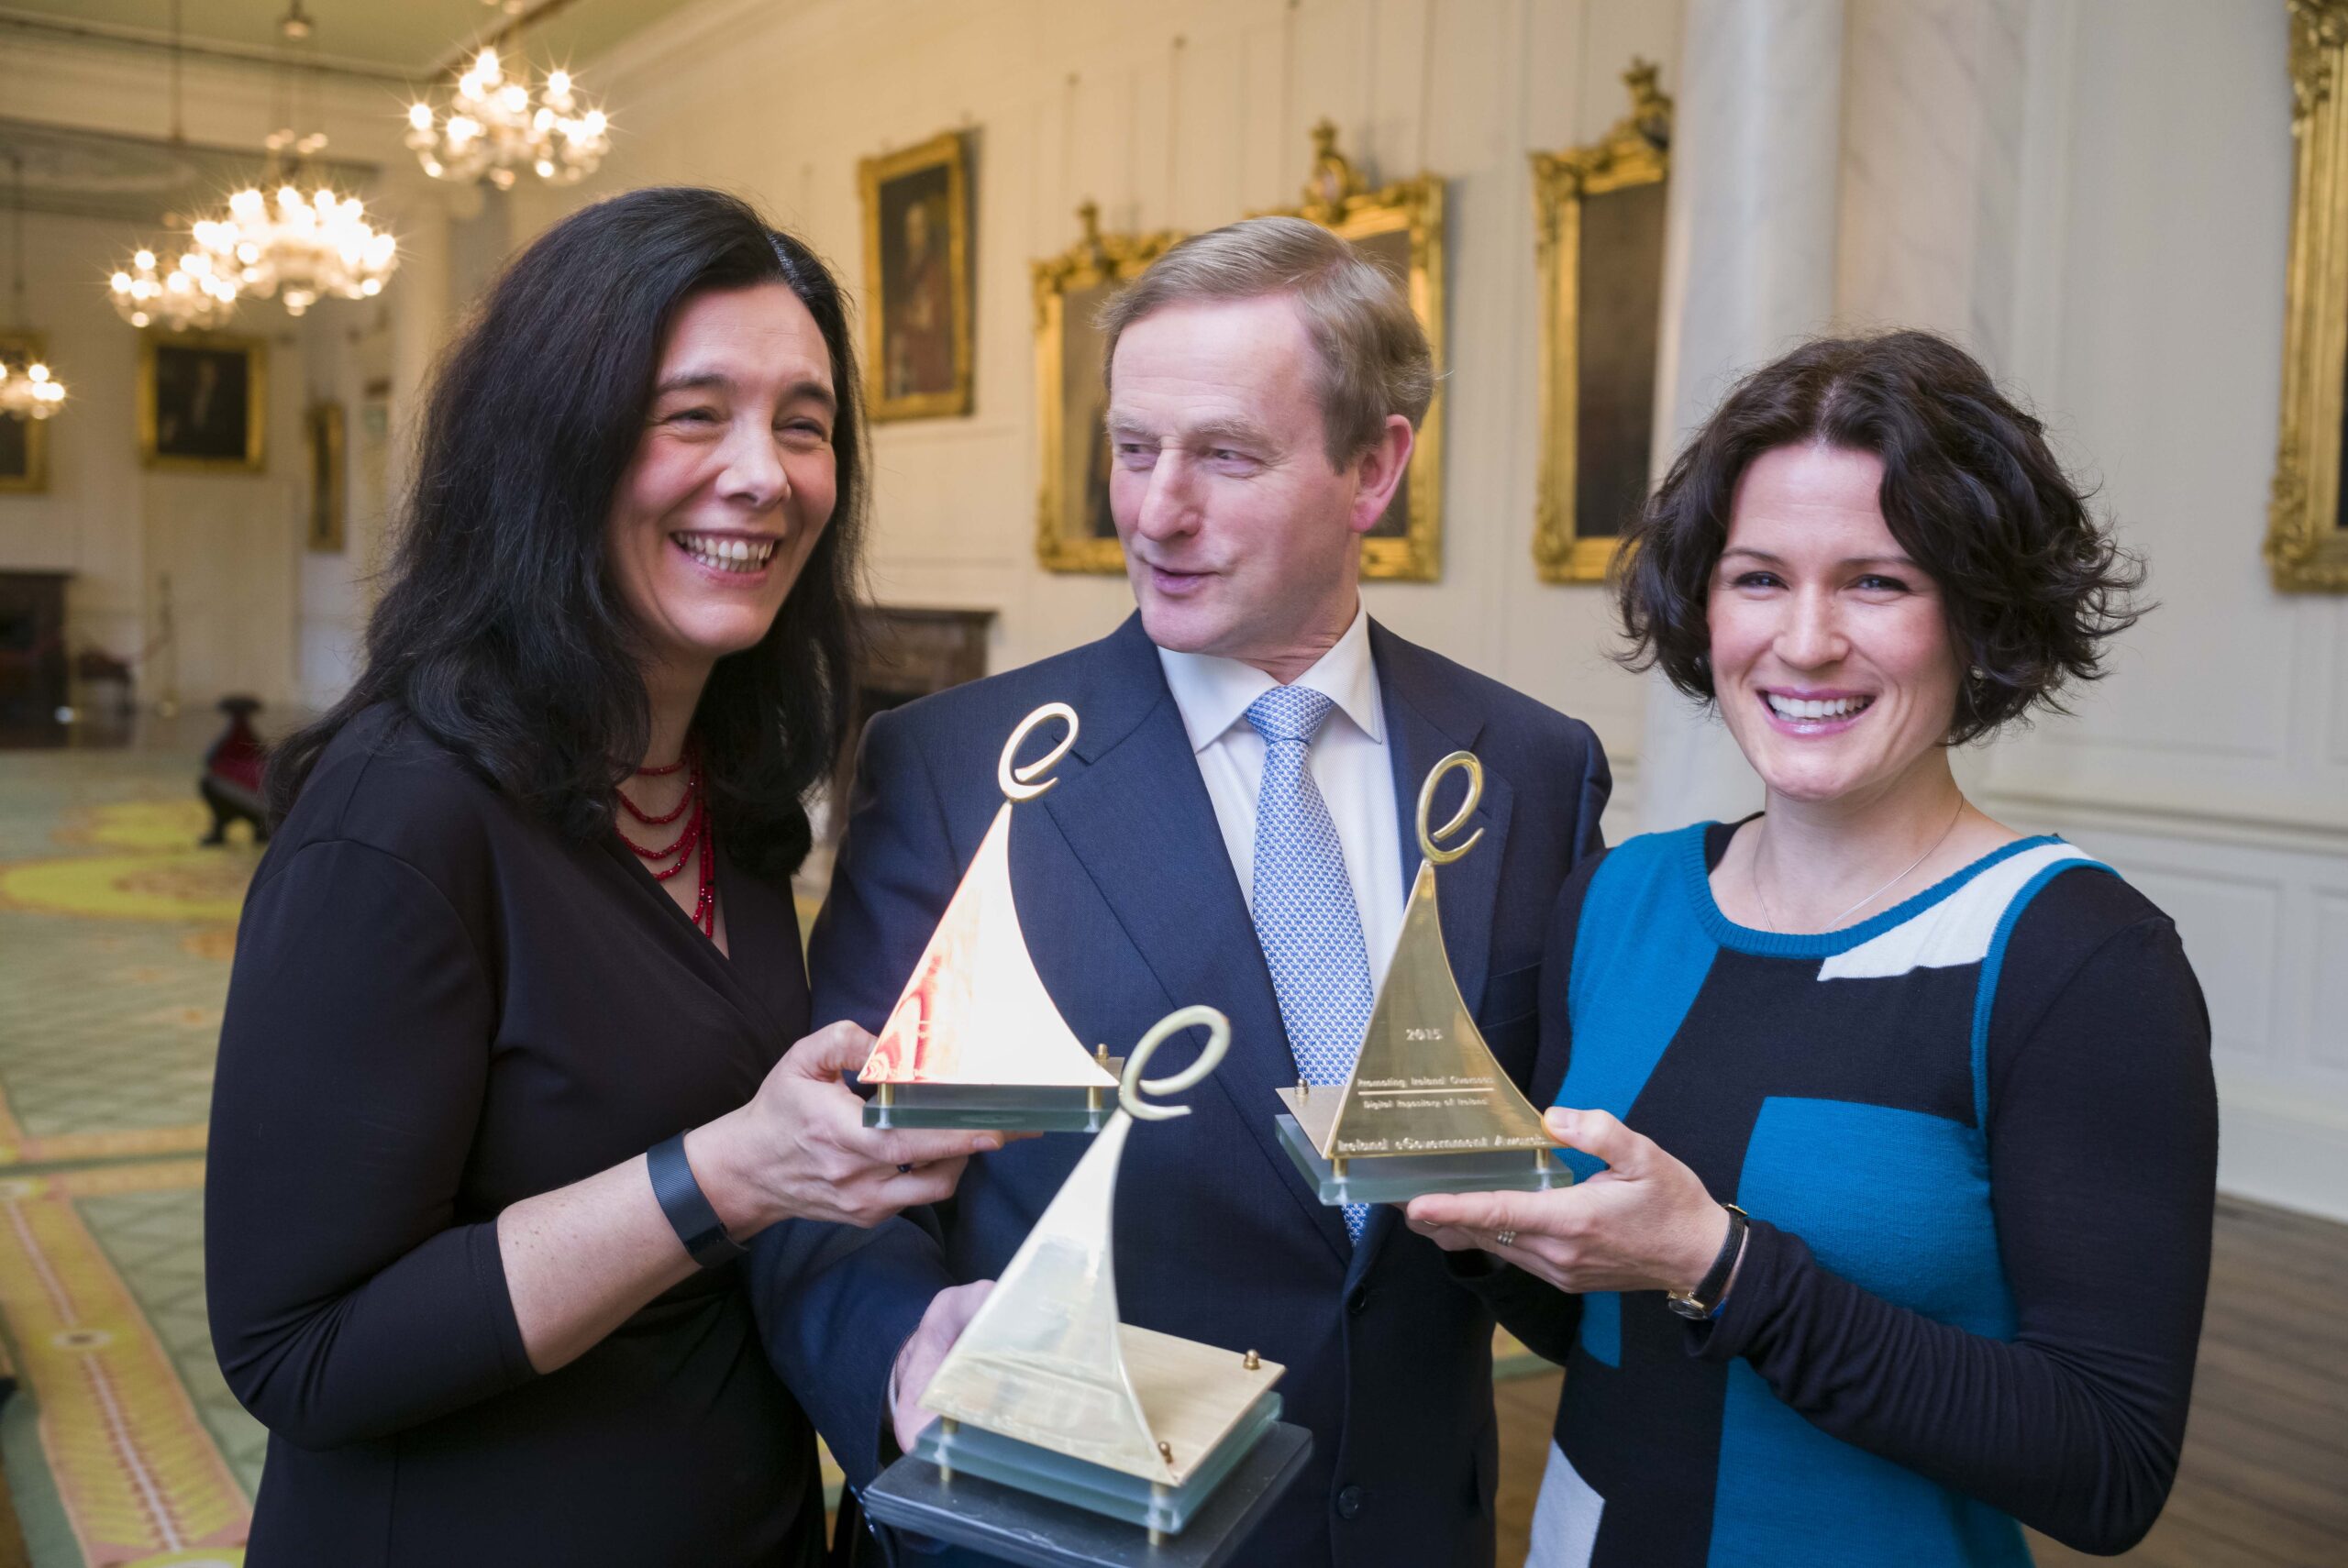 Photo free to use;<br />Business:<br />
29/01/15;<br />
An Taoiseach Enda Kenny TD, presented (L) Dr Sandra Collins and (R)Dr Natalie Harrower, of The Digital Repository of Ireland (DRI) today the Overall Award for the ‘Inspiring Ireland’ project at the 2014 eGovernment Awards. The DRI, which is the national digital storage location for Ireland’s social and cultural data, was also crowned winner of the Open Source Award, and the Promoting Ireland Overseas Award.<br />
 <br />
Sponsored by eircom Business Solutions, the Awards are jointly run by the Public Sector Times and digital marketing company Elucidate.;<br />
Photo: John T Ohle Photography;<br />
For more information: Eilish Joyce, FleishmanHillard E: Eilish.joyce@fleishmaneurope.com M: +353 87 791 4641